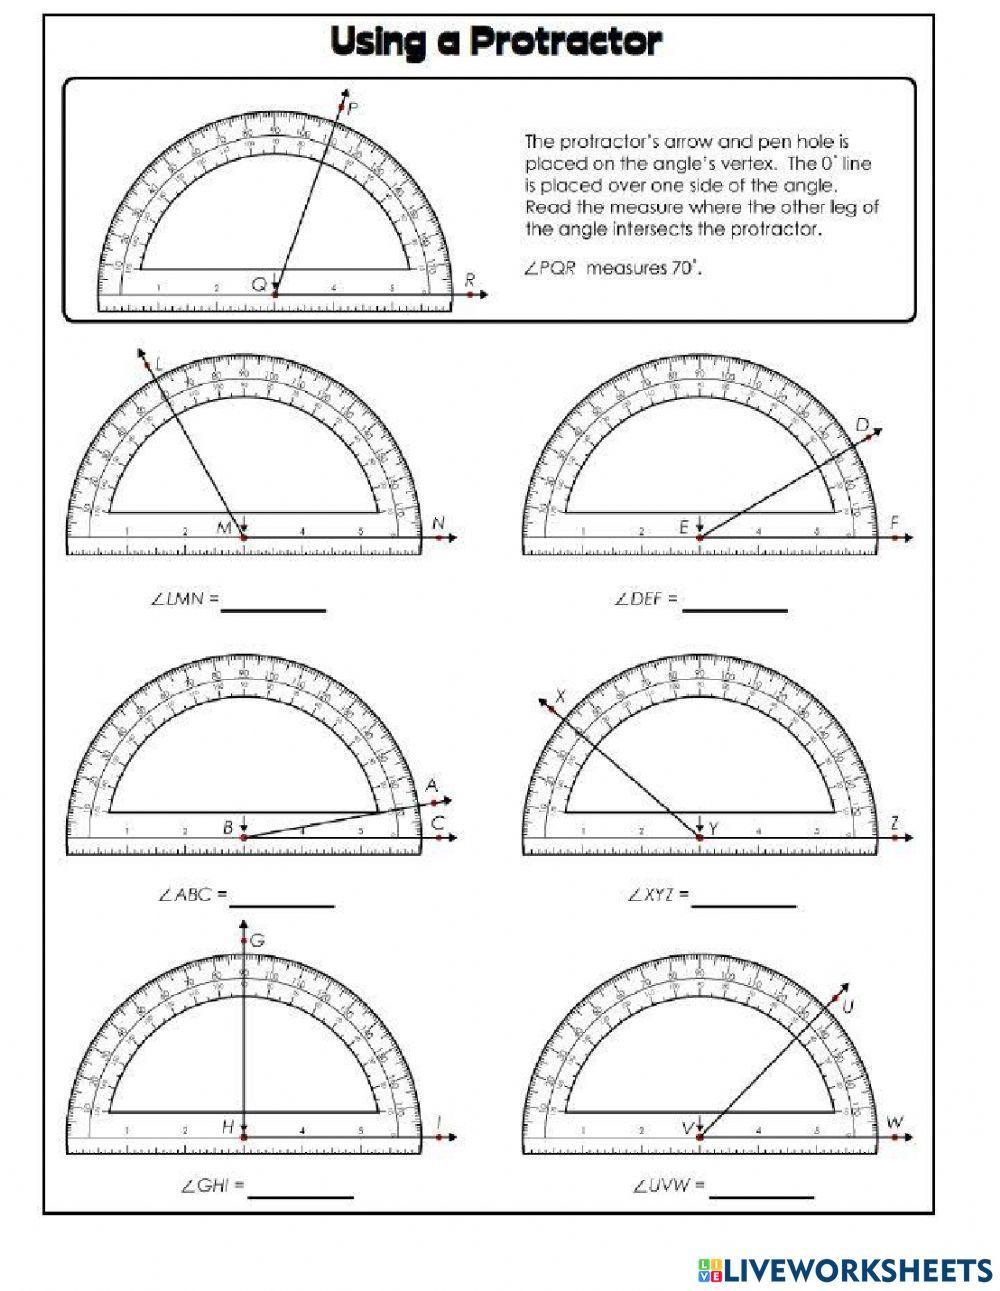 Name the angle using Protractor